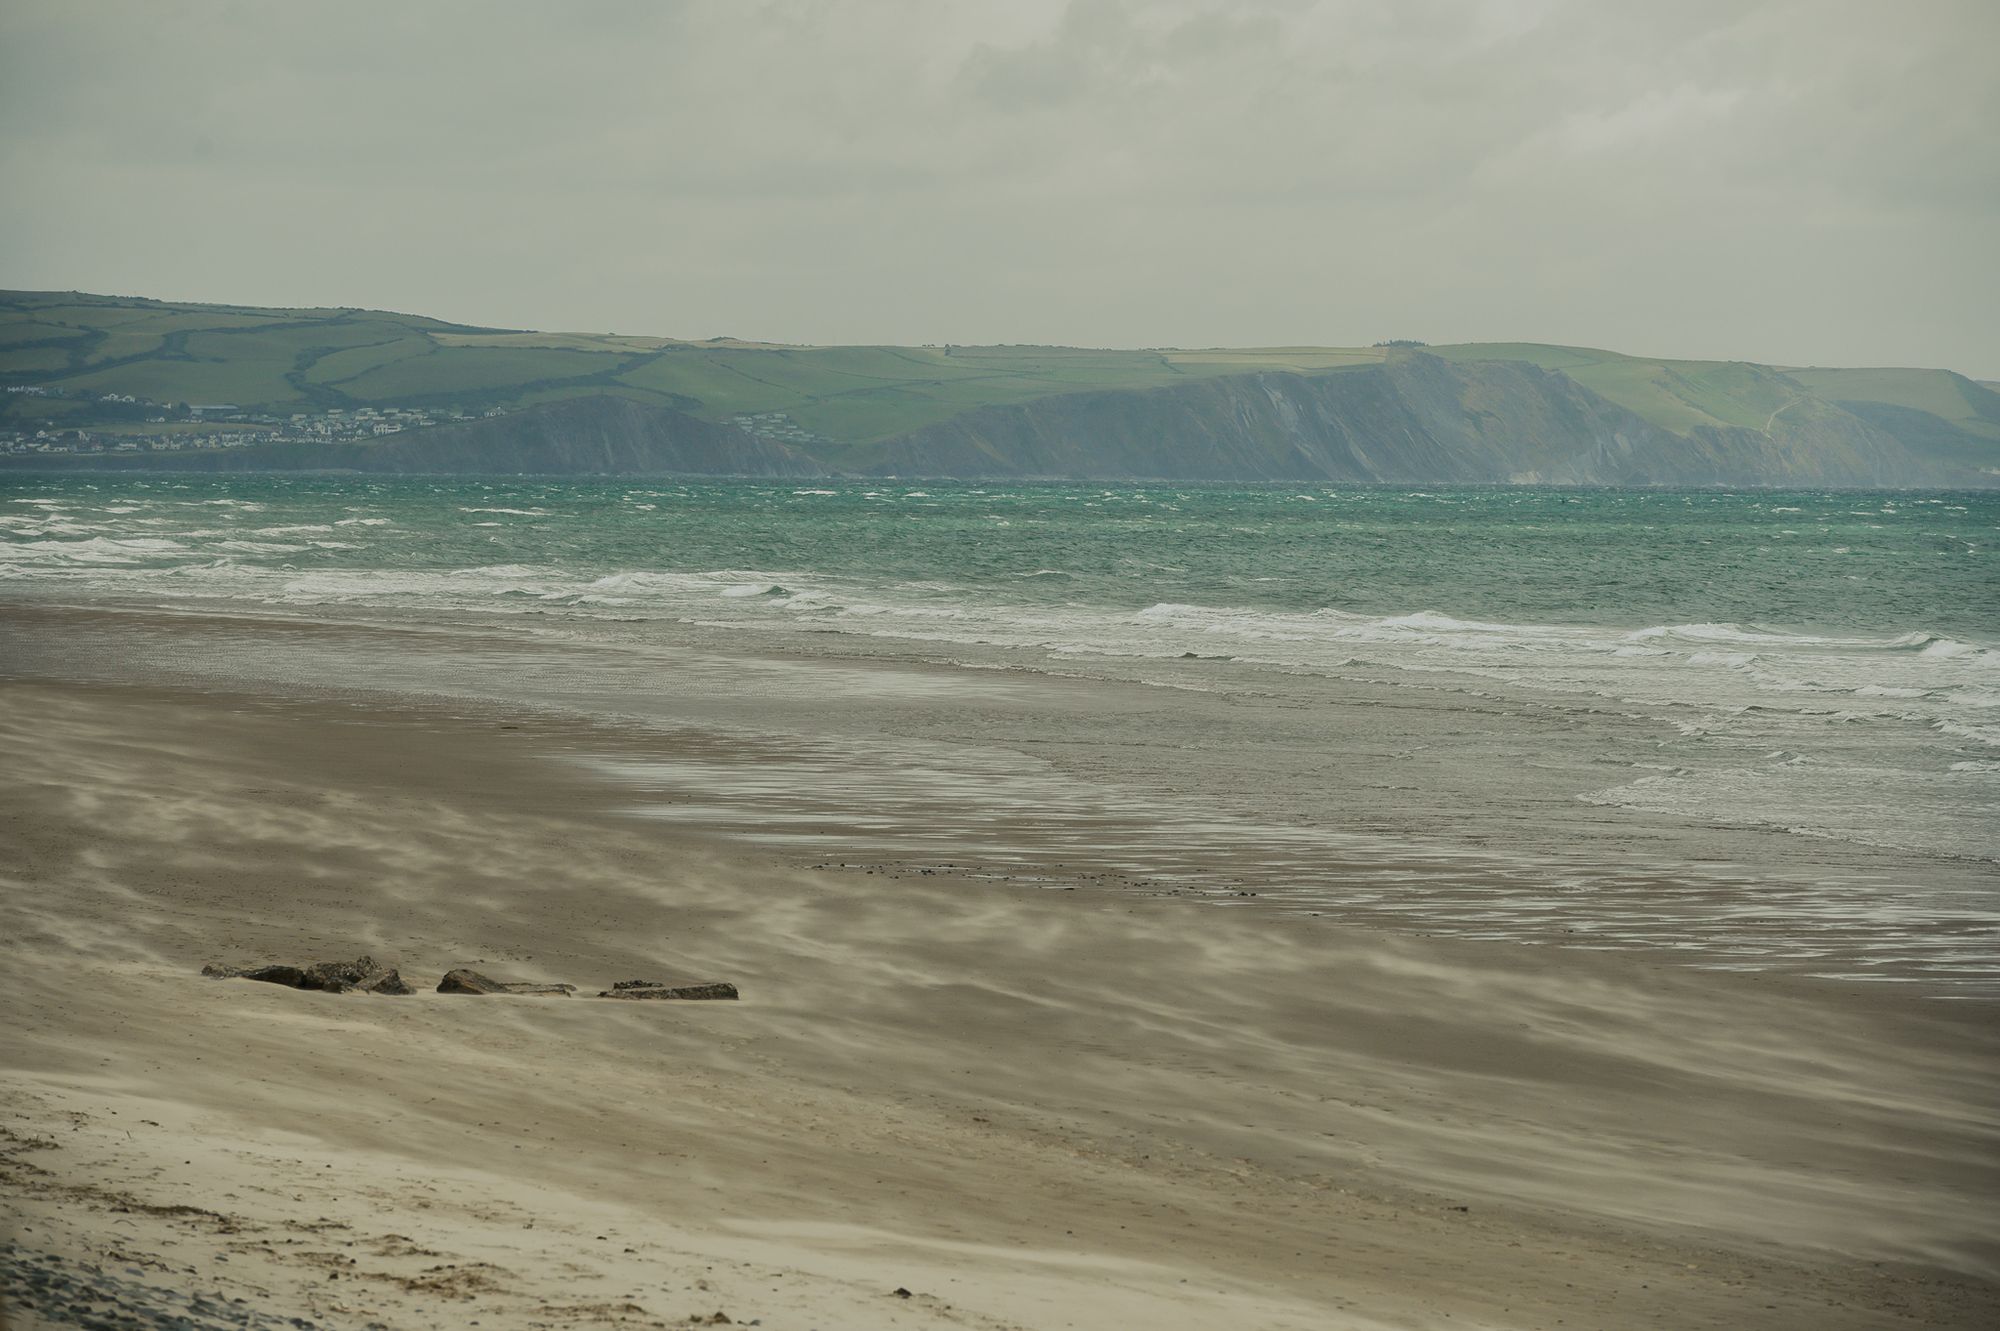 On a windy day sand flows across a beach while the tide goes out. In the distance there are cliffs and big hills.